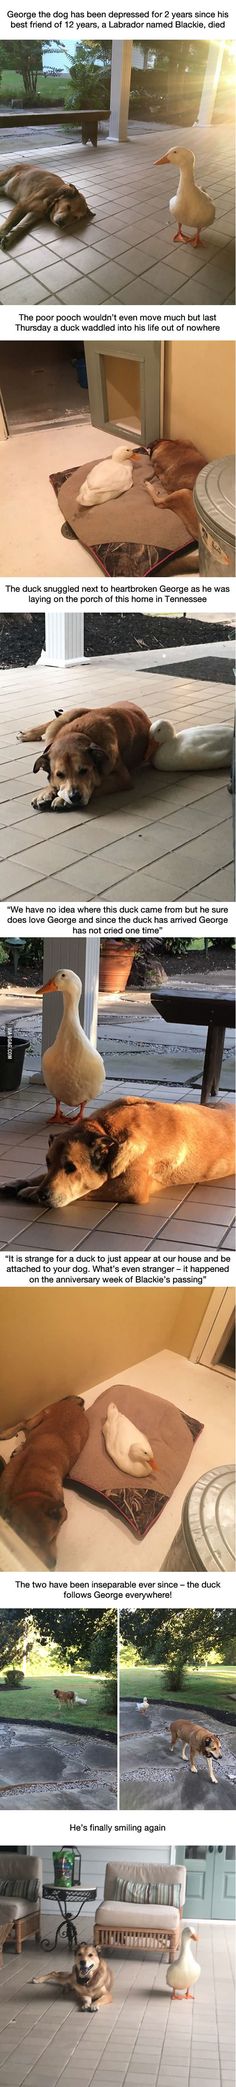 This dog was depressed for 2 years after his best friend died, but then this duck showed up...